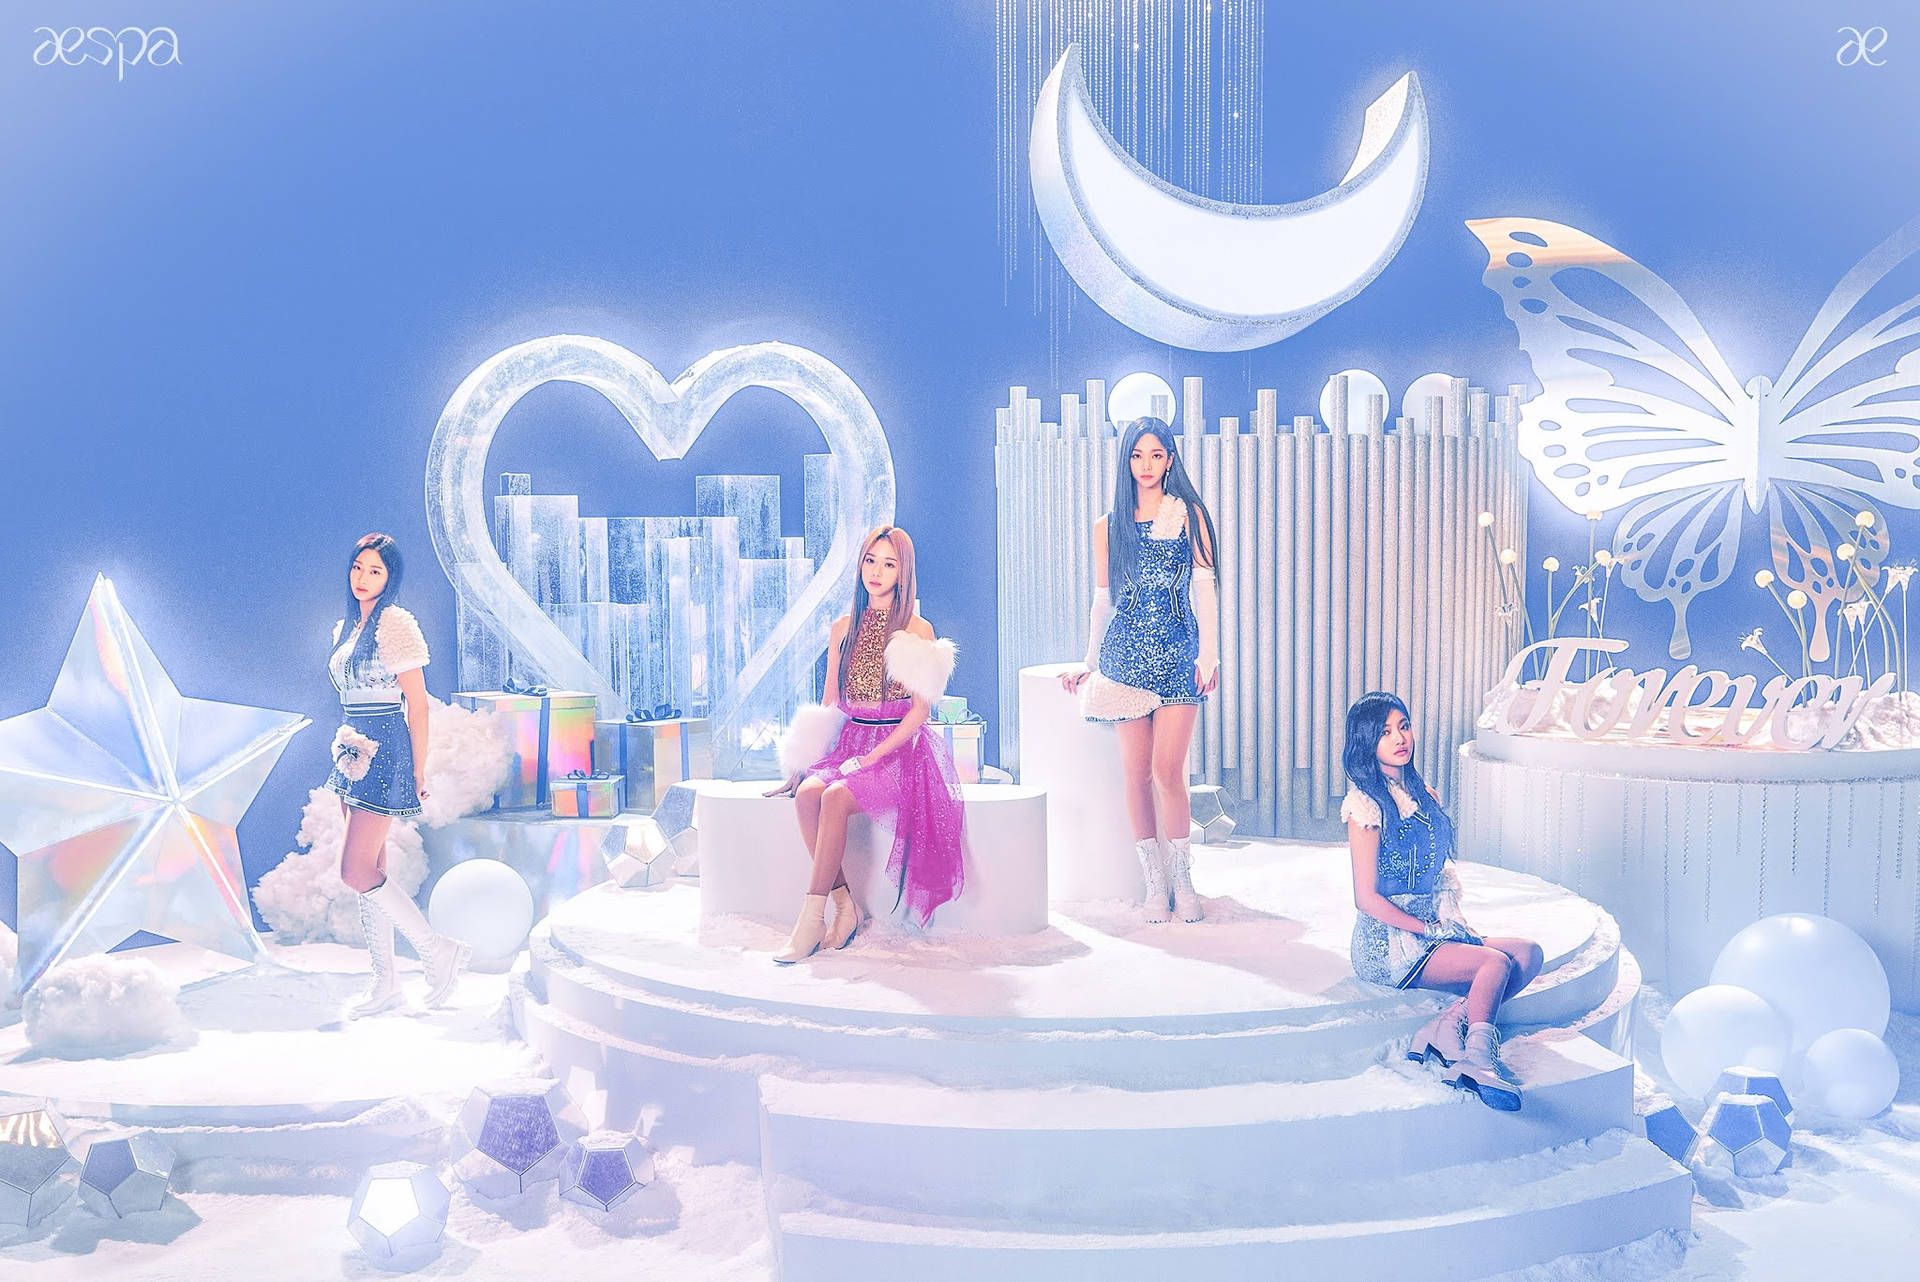 A music video still of four women in a blue room with a white heart, moon, and star. - Aespa